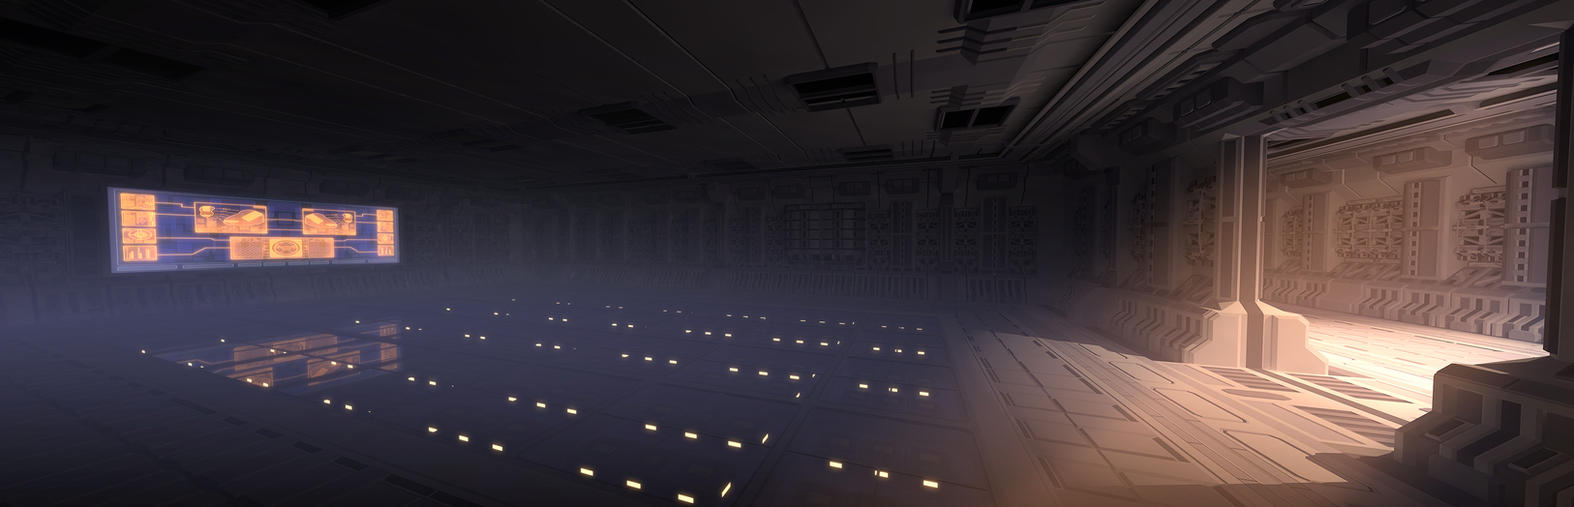 B - Mystère au sous sol 35 Server_room_panorama_by_lorddoomhammer-d7rquzf